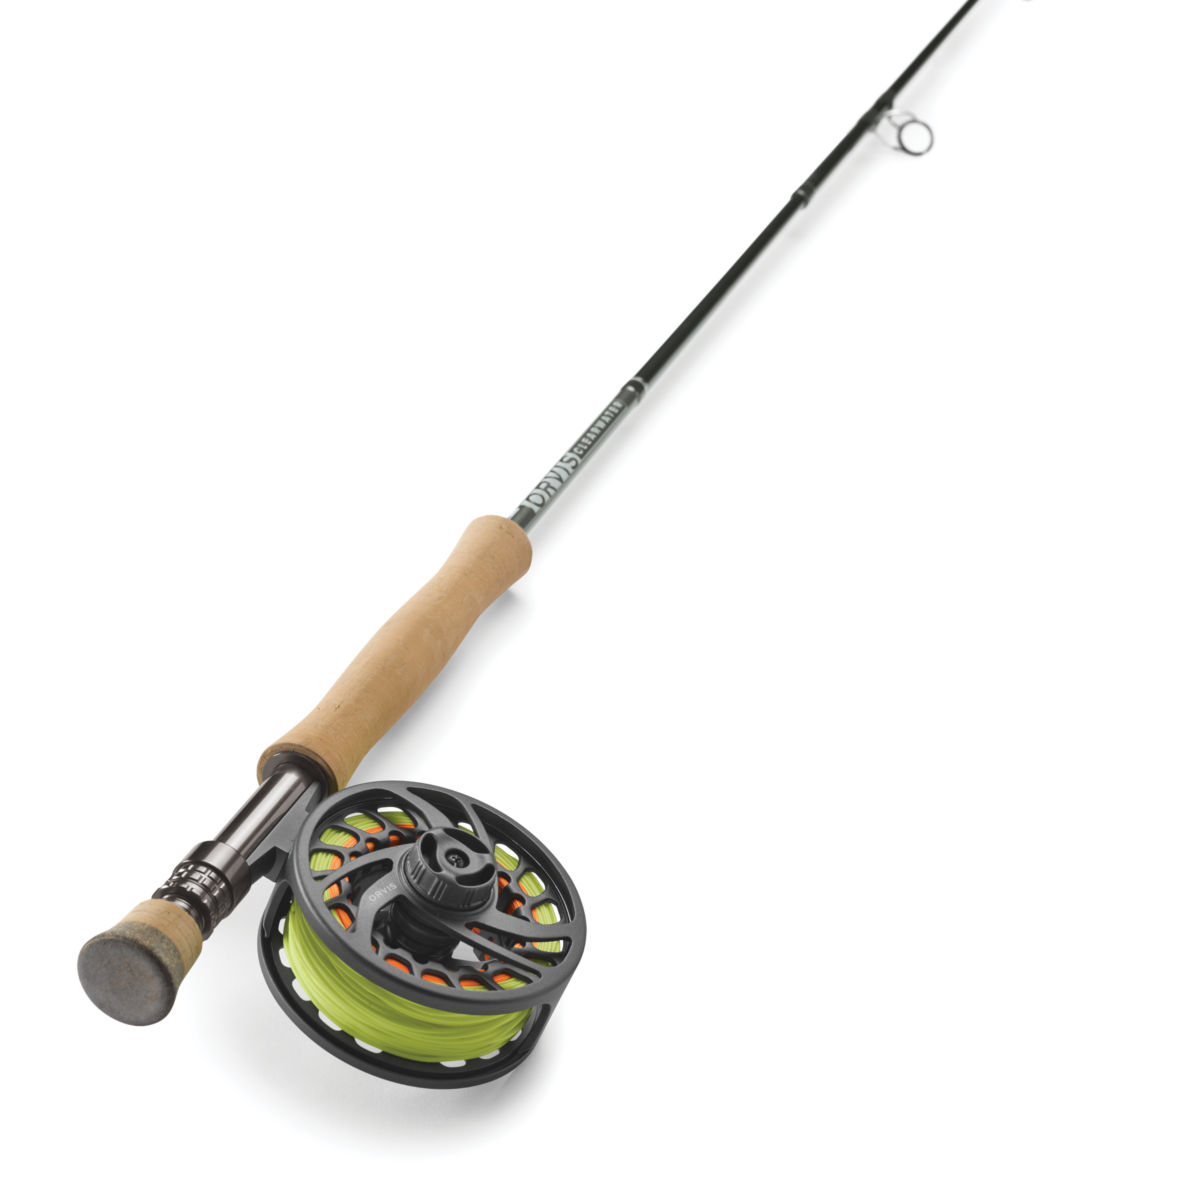 Orvis Encounter 966-4 Fly Rod Outfit 9'6" 6wt 